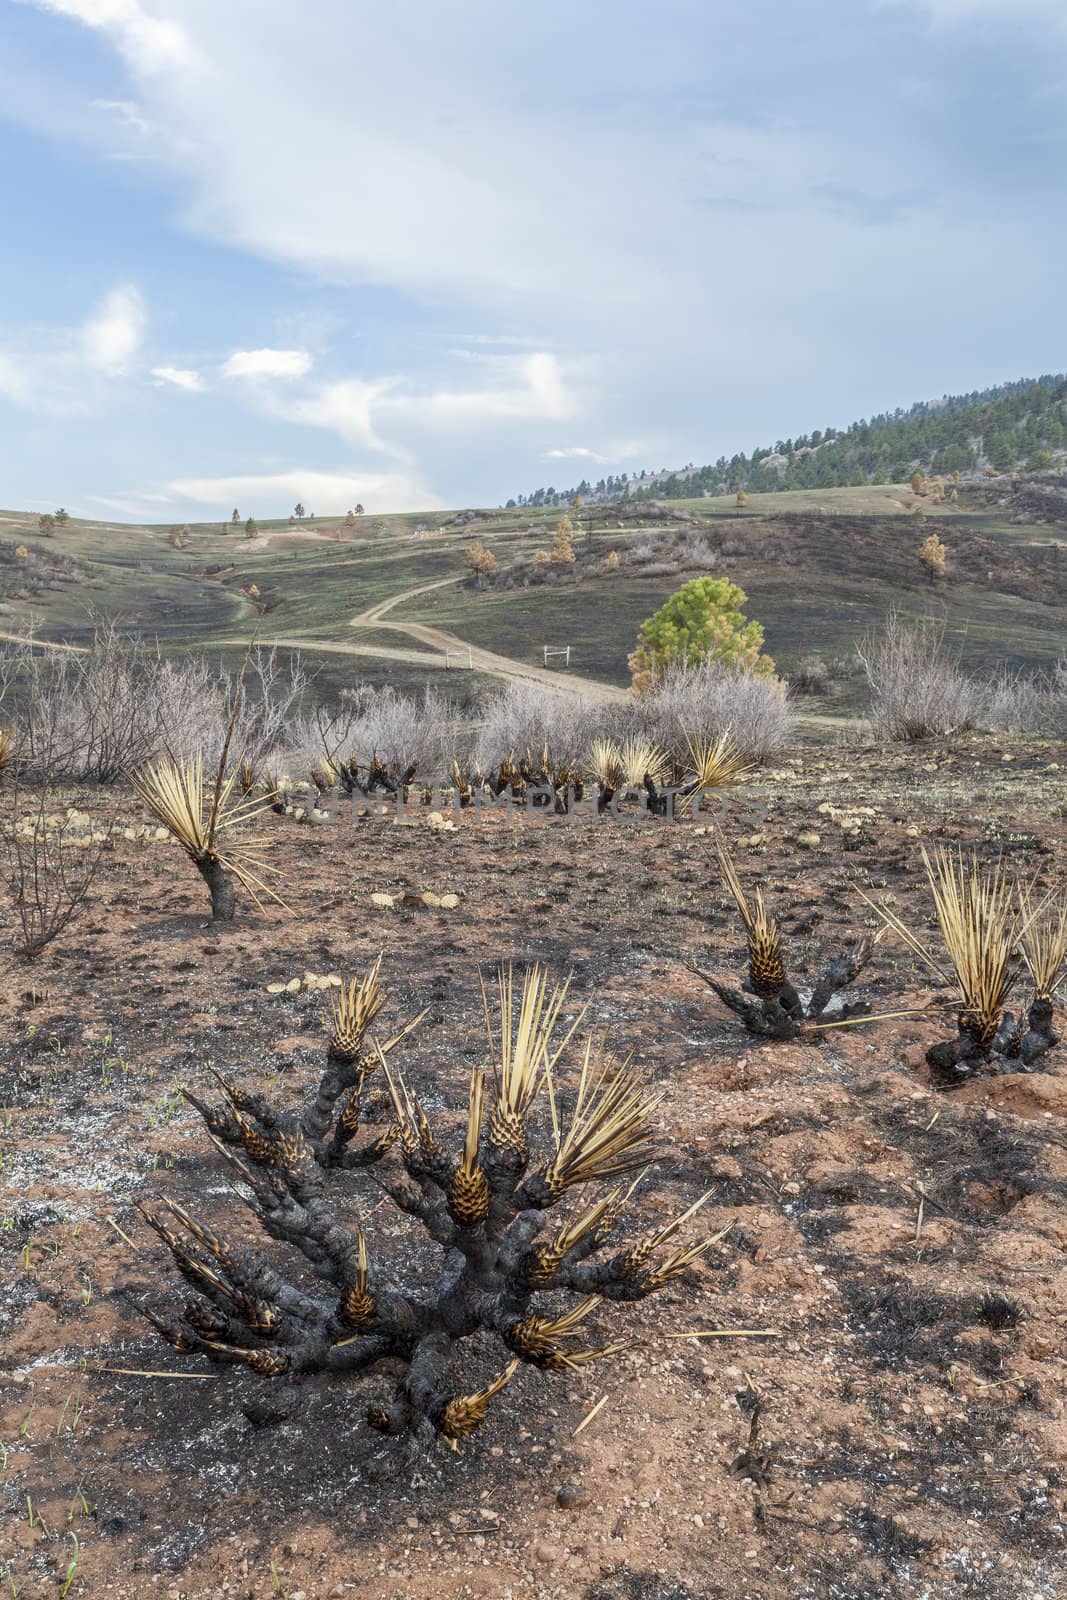 burnt yucca and bushes after Galena wildfire in Lory State Park near Fort COllins, Colorado, green grass starting to regrow, April 2013